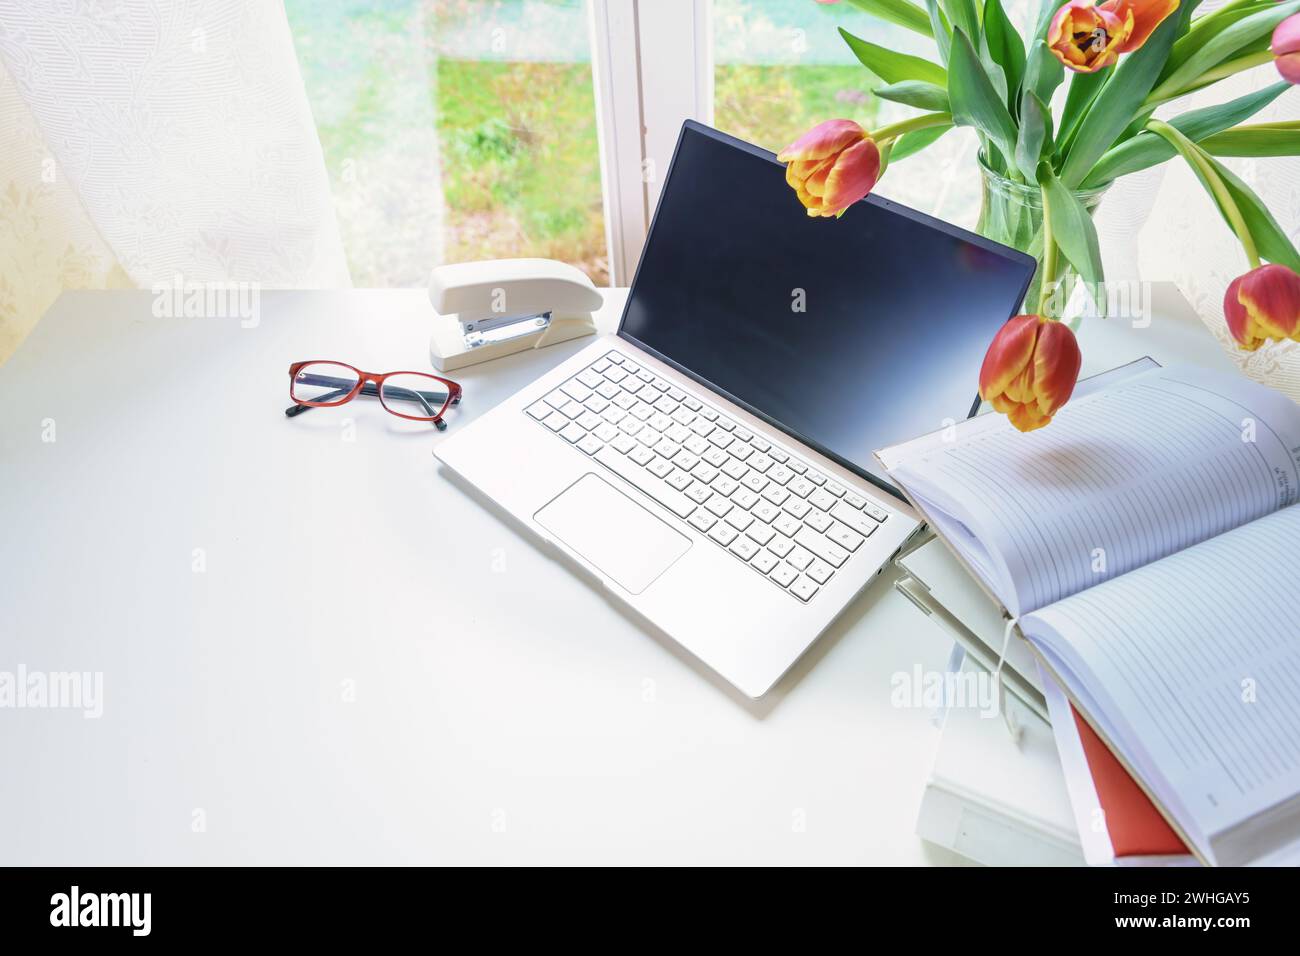 Workplace by a window with laptop, organizer, ring binder and a bouquet of red tulips on a white desk, concept for study or home Stock Photo